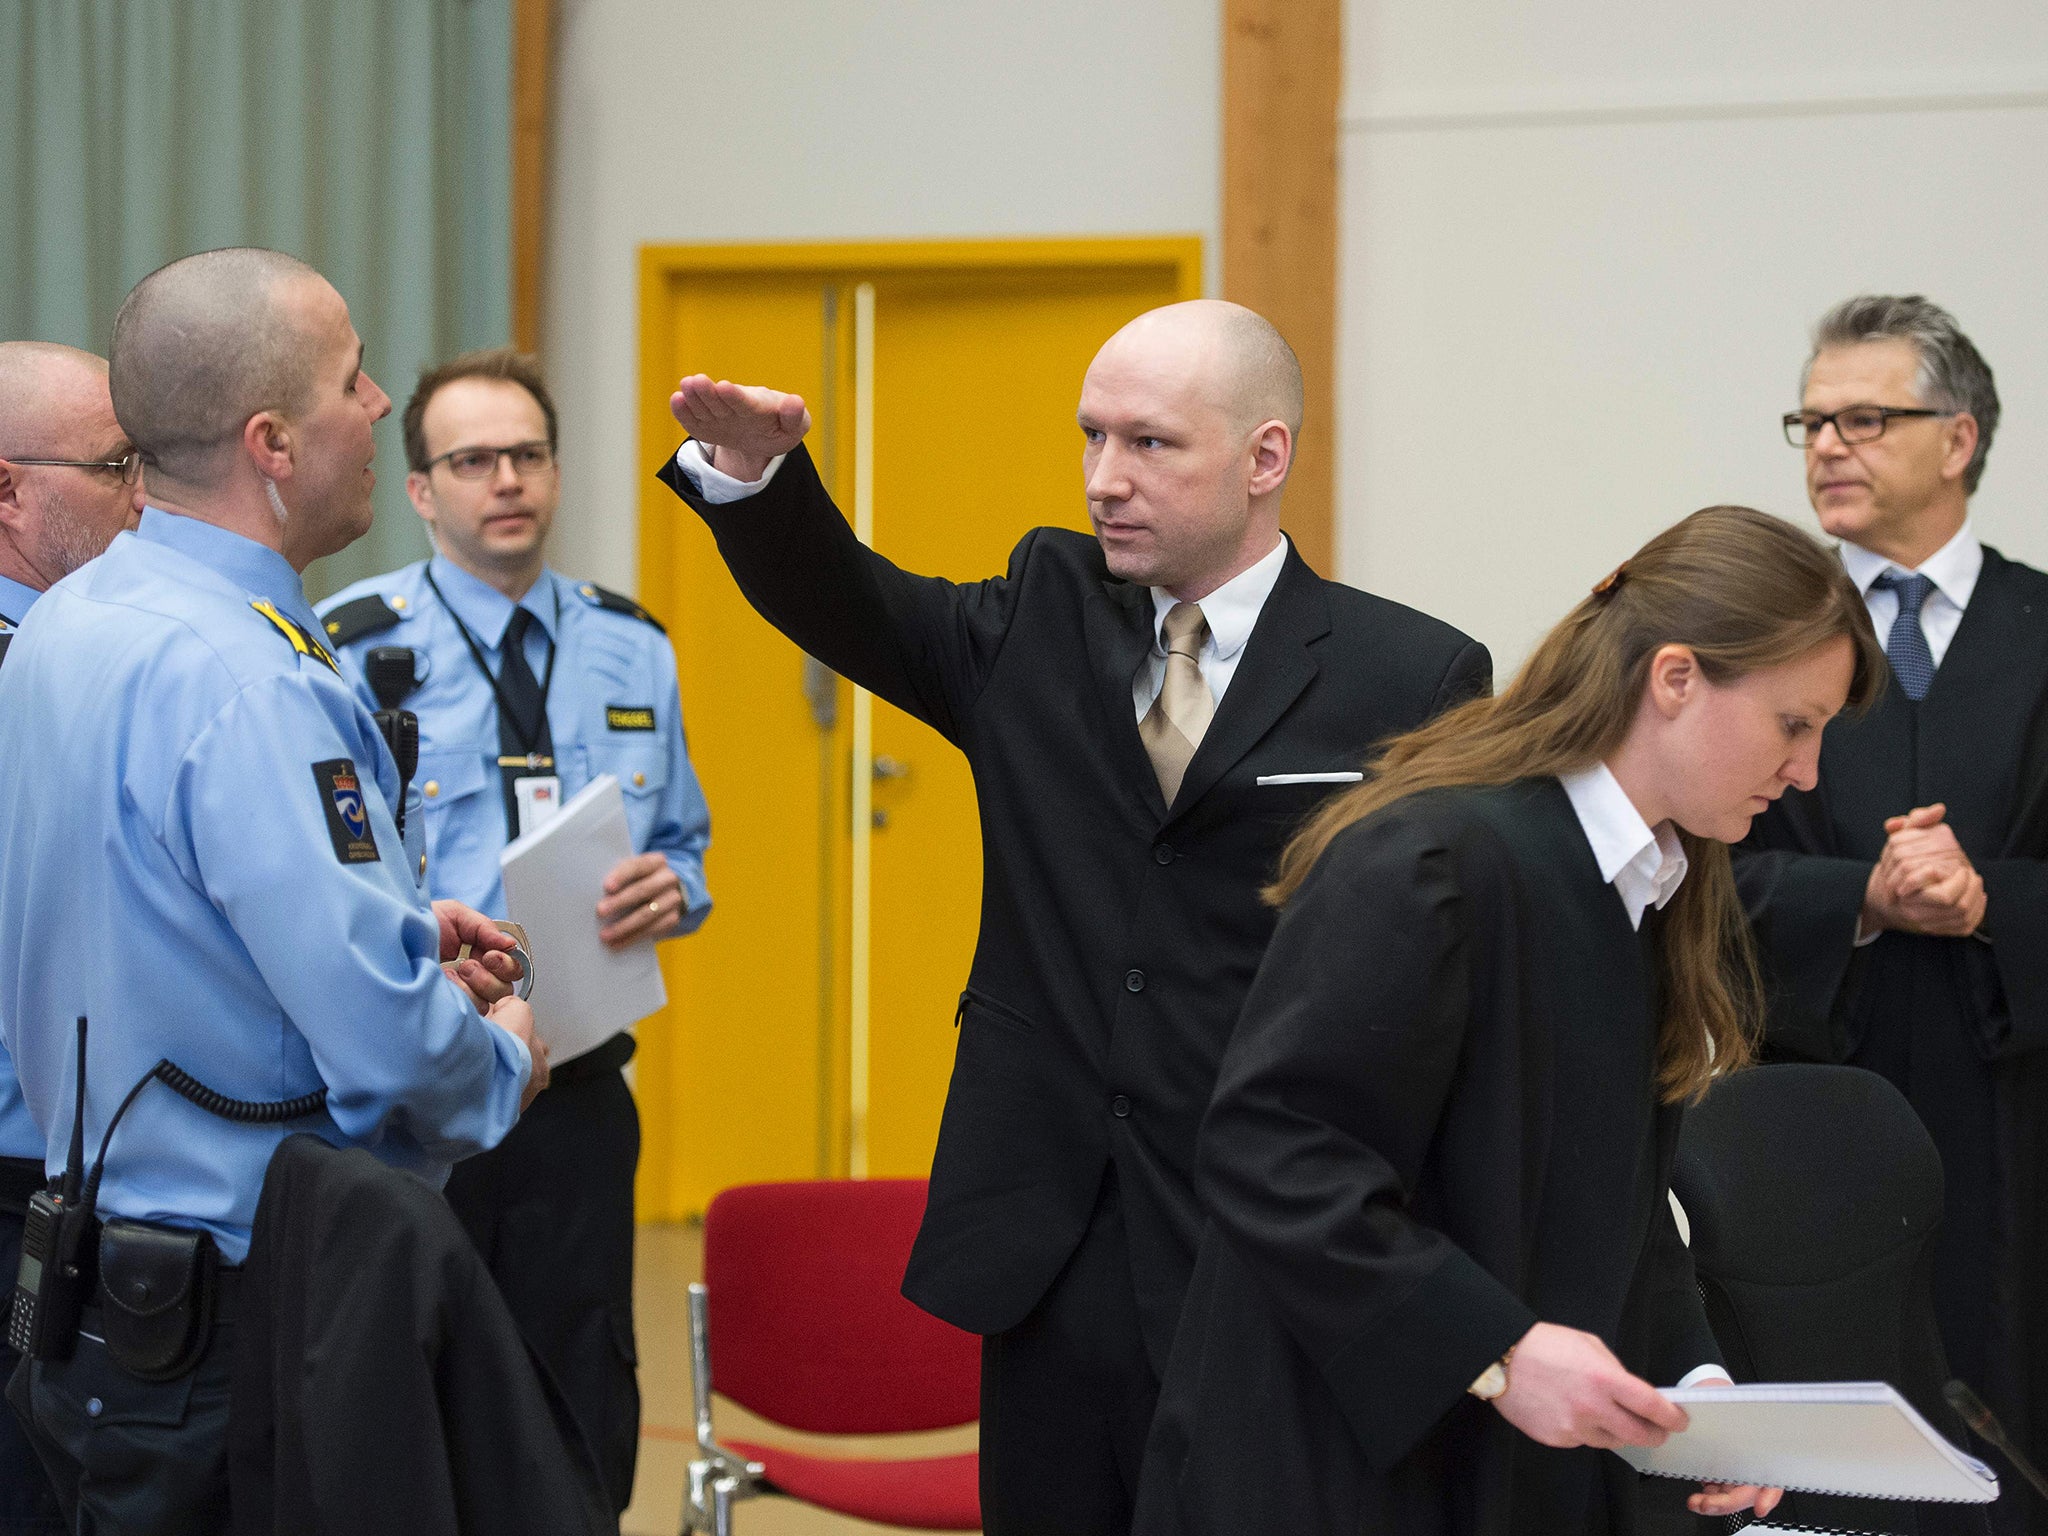 anders-breivik-makes-nazi-salutes-at-start-of-human-rights-court-case